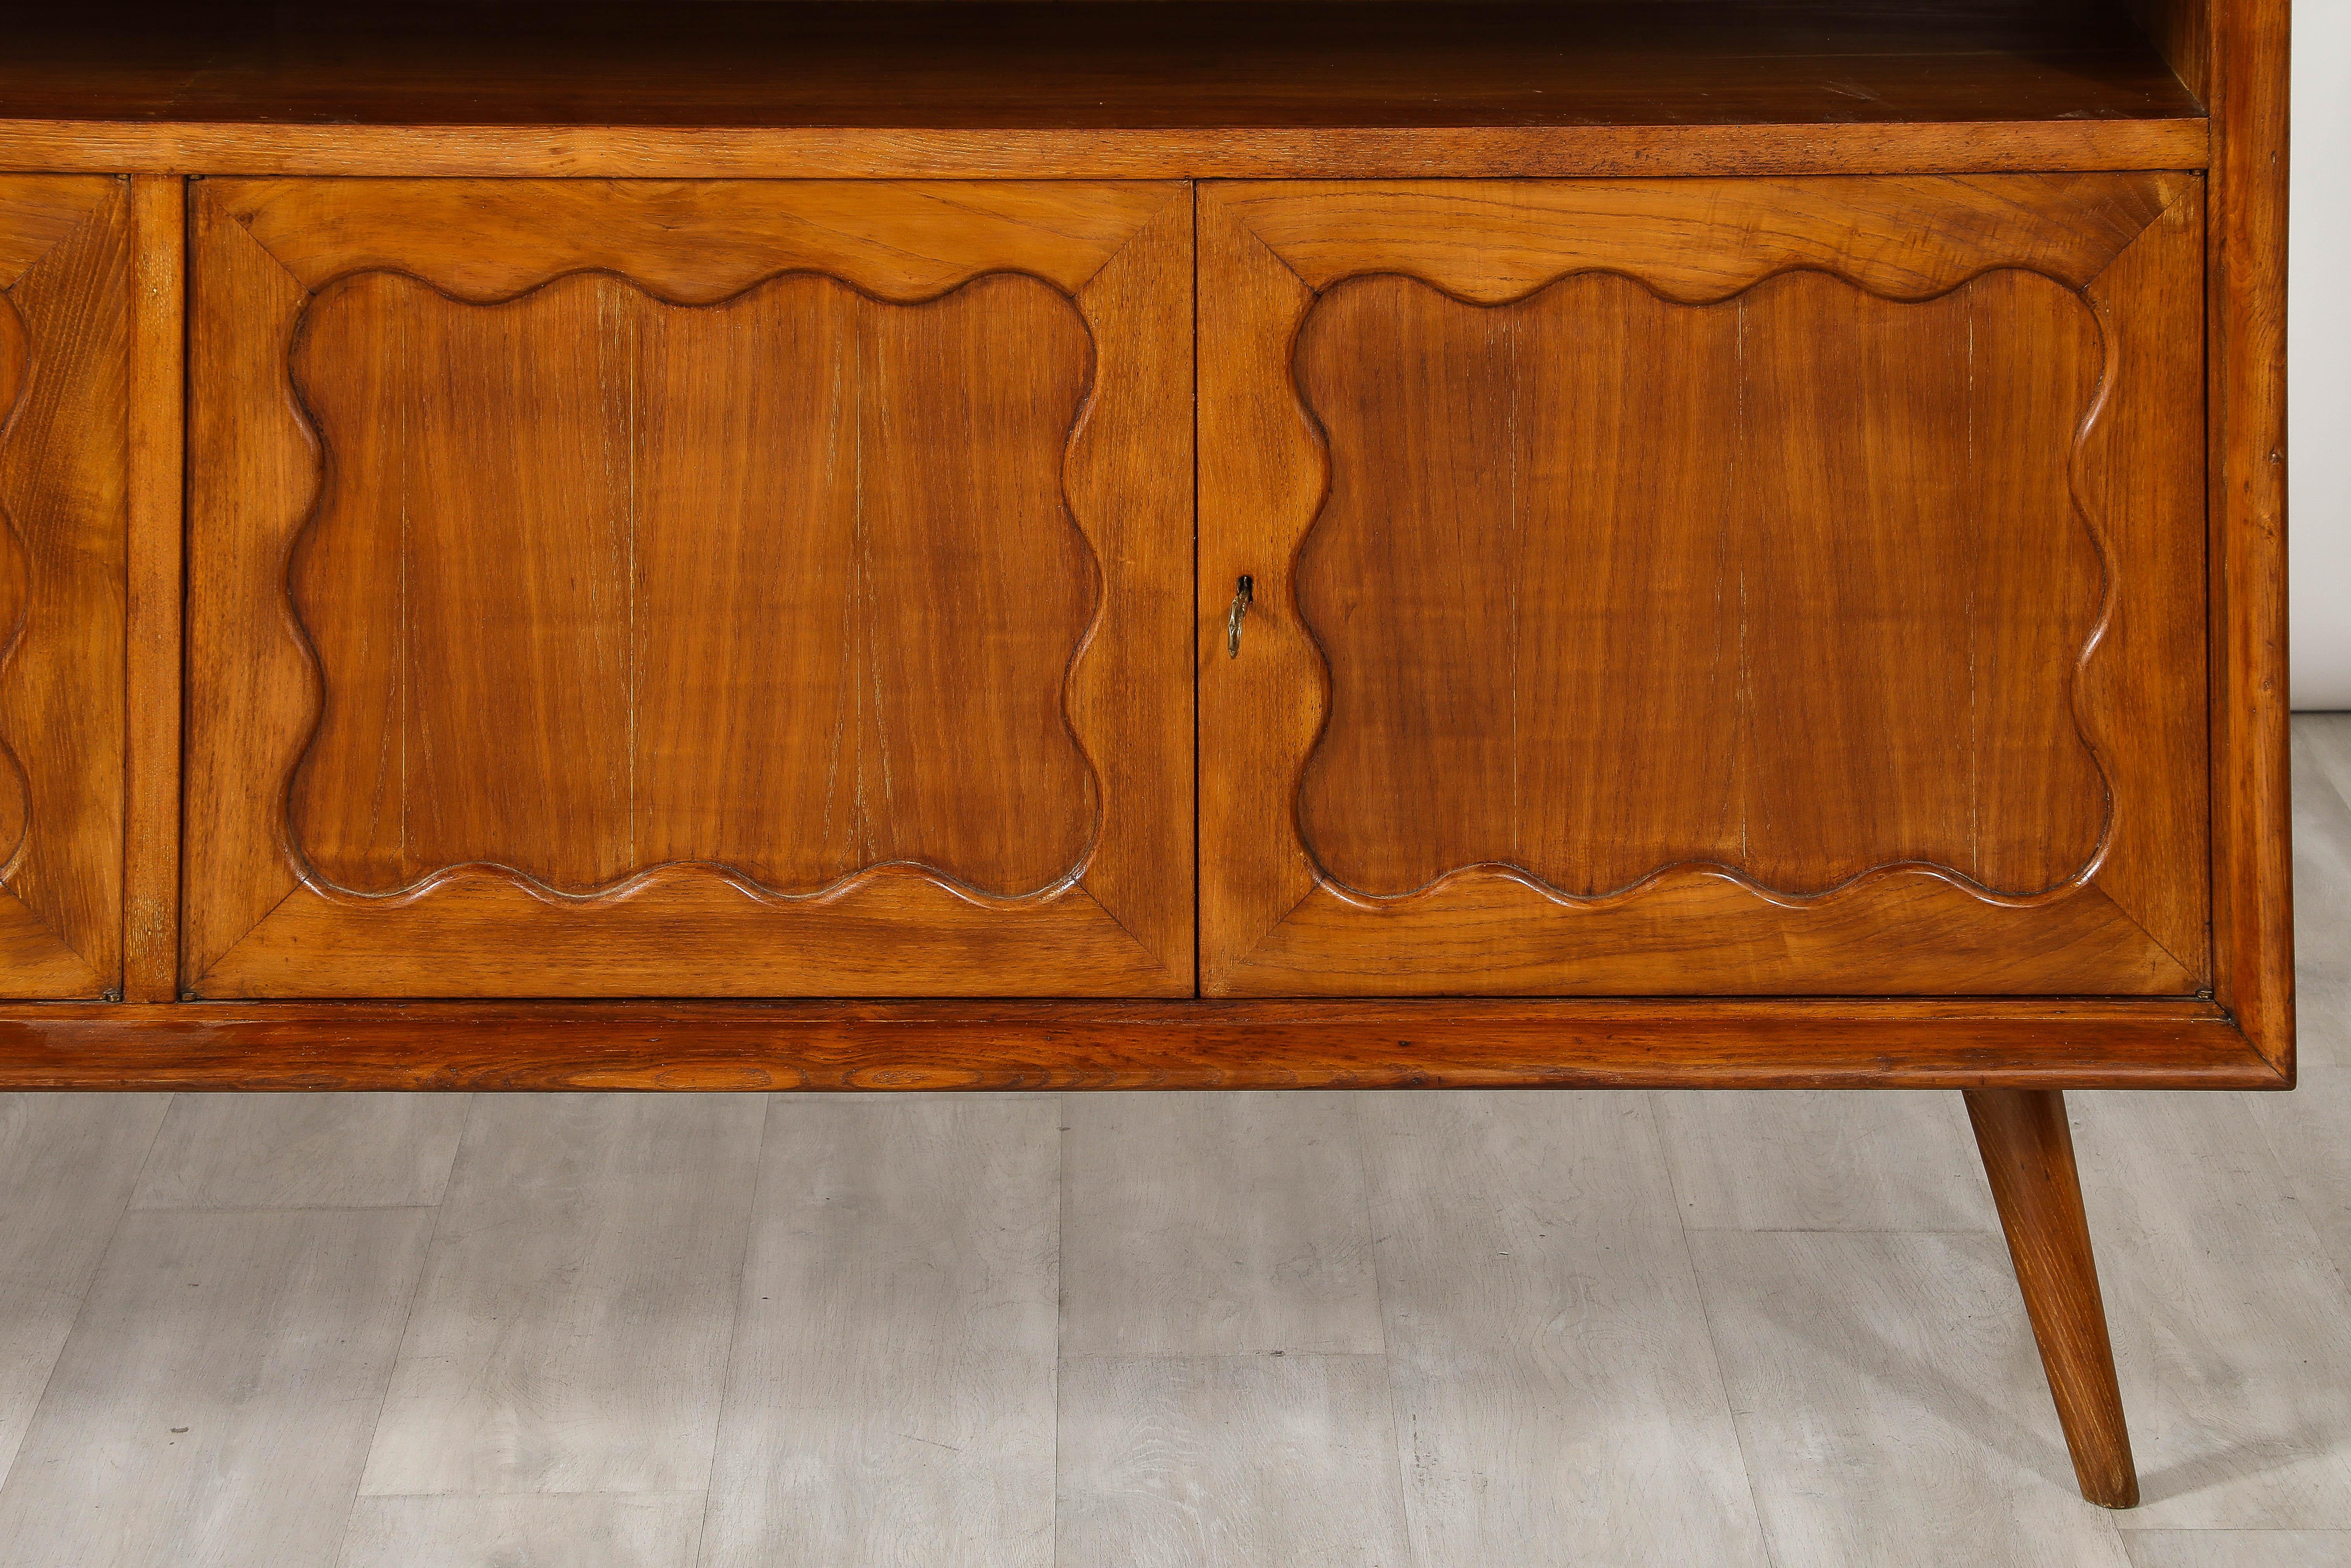 A charming hand-carved walnut and oak credenza or sideboard by Italian designer Paolo Buffa, circa 1950.   The four doors with scalloped carving open to reveal internal shelves, with three enclosed small drawers with brass ring pulls on the right